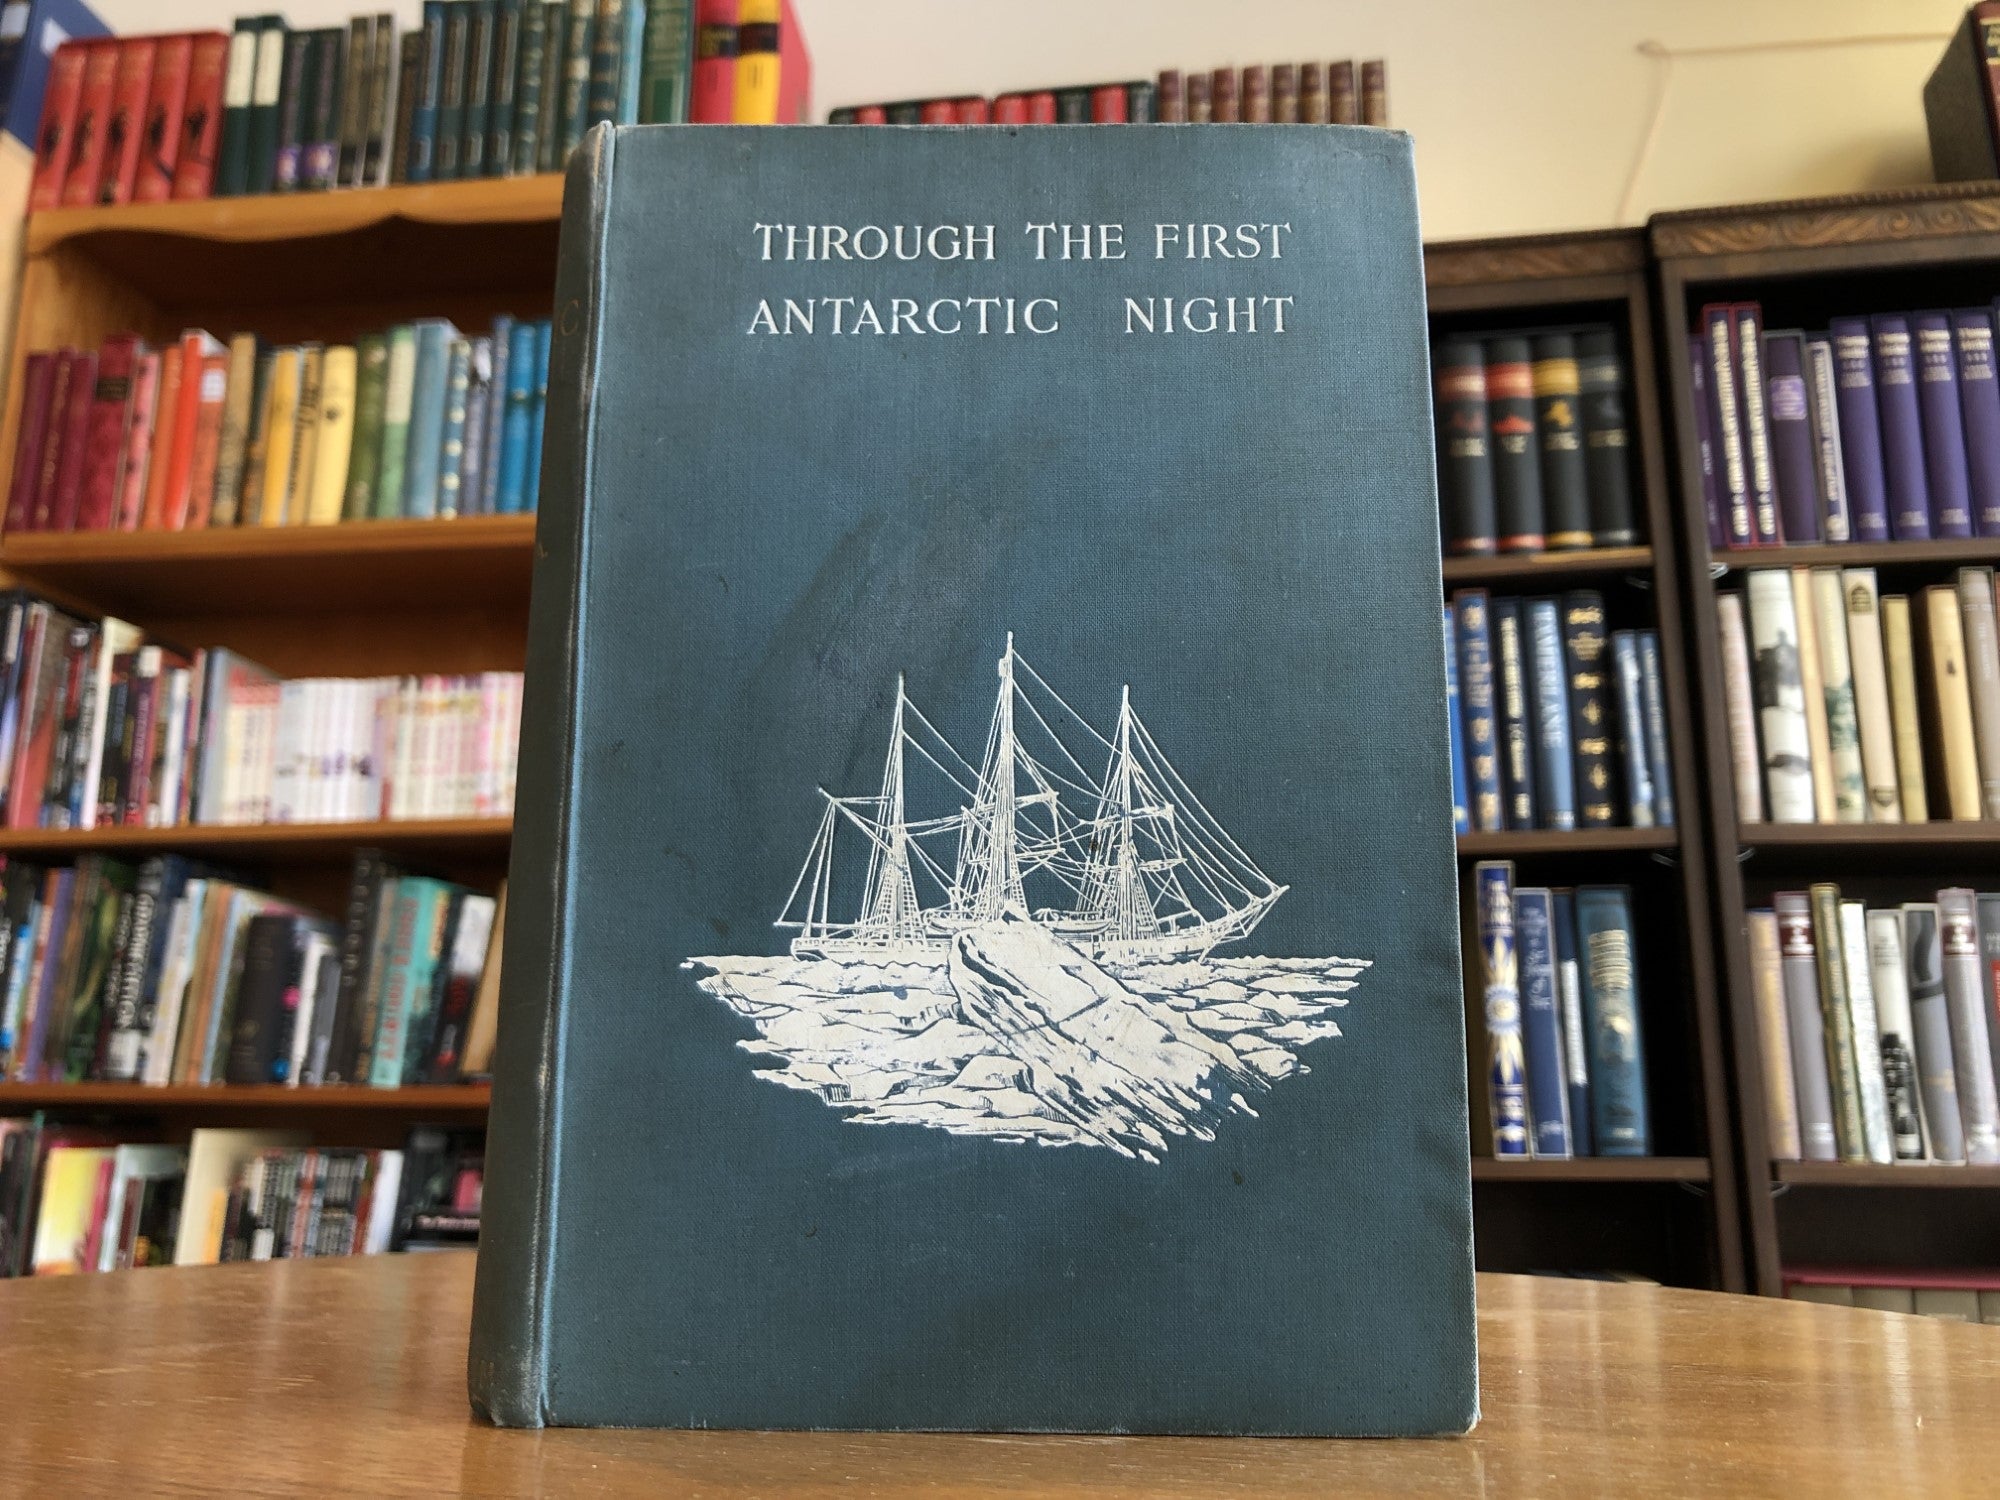 Cook, Dr. Frederick A. - Through the First Antarctic Night, 1898-1899: A Narrative of the Voyage of the 'Belgica' Among Newly Discovered Lands and over an Unknown Sea About the South Pole; with an Appendix Containing a Summary of the Scientific